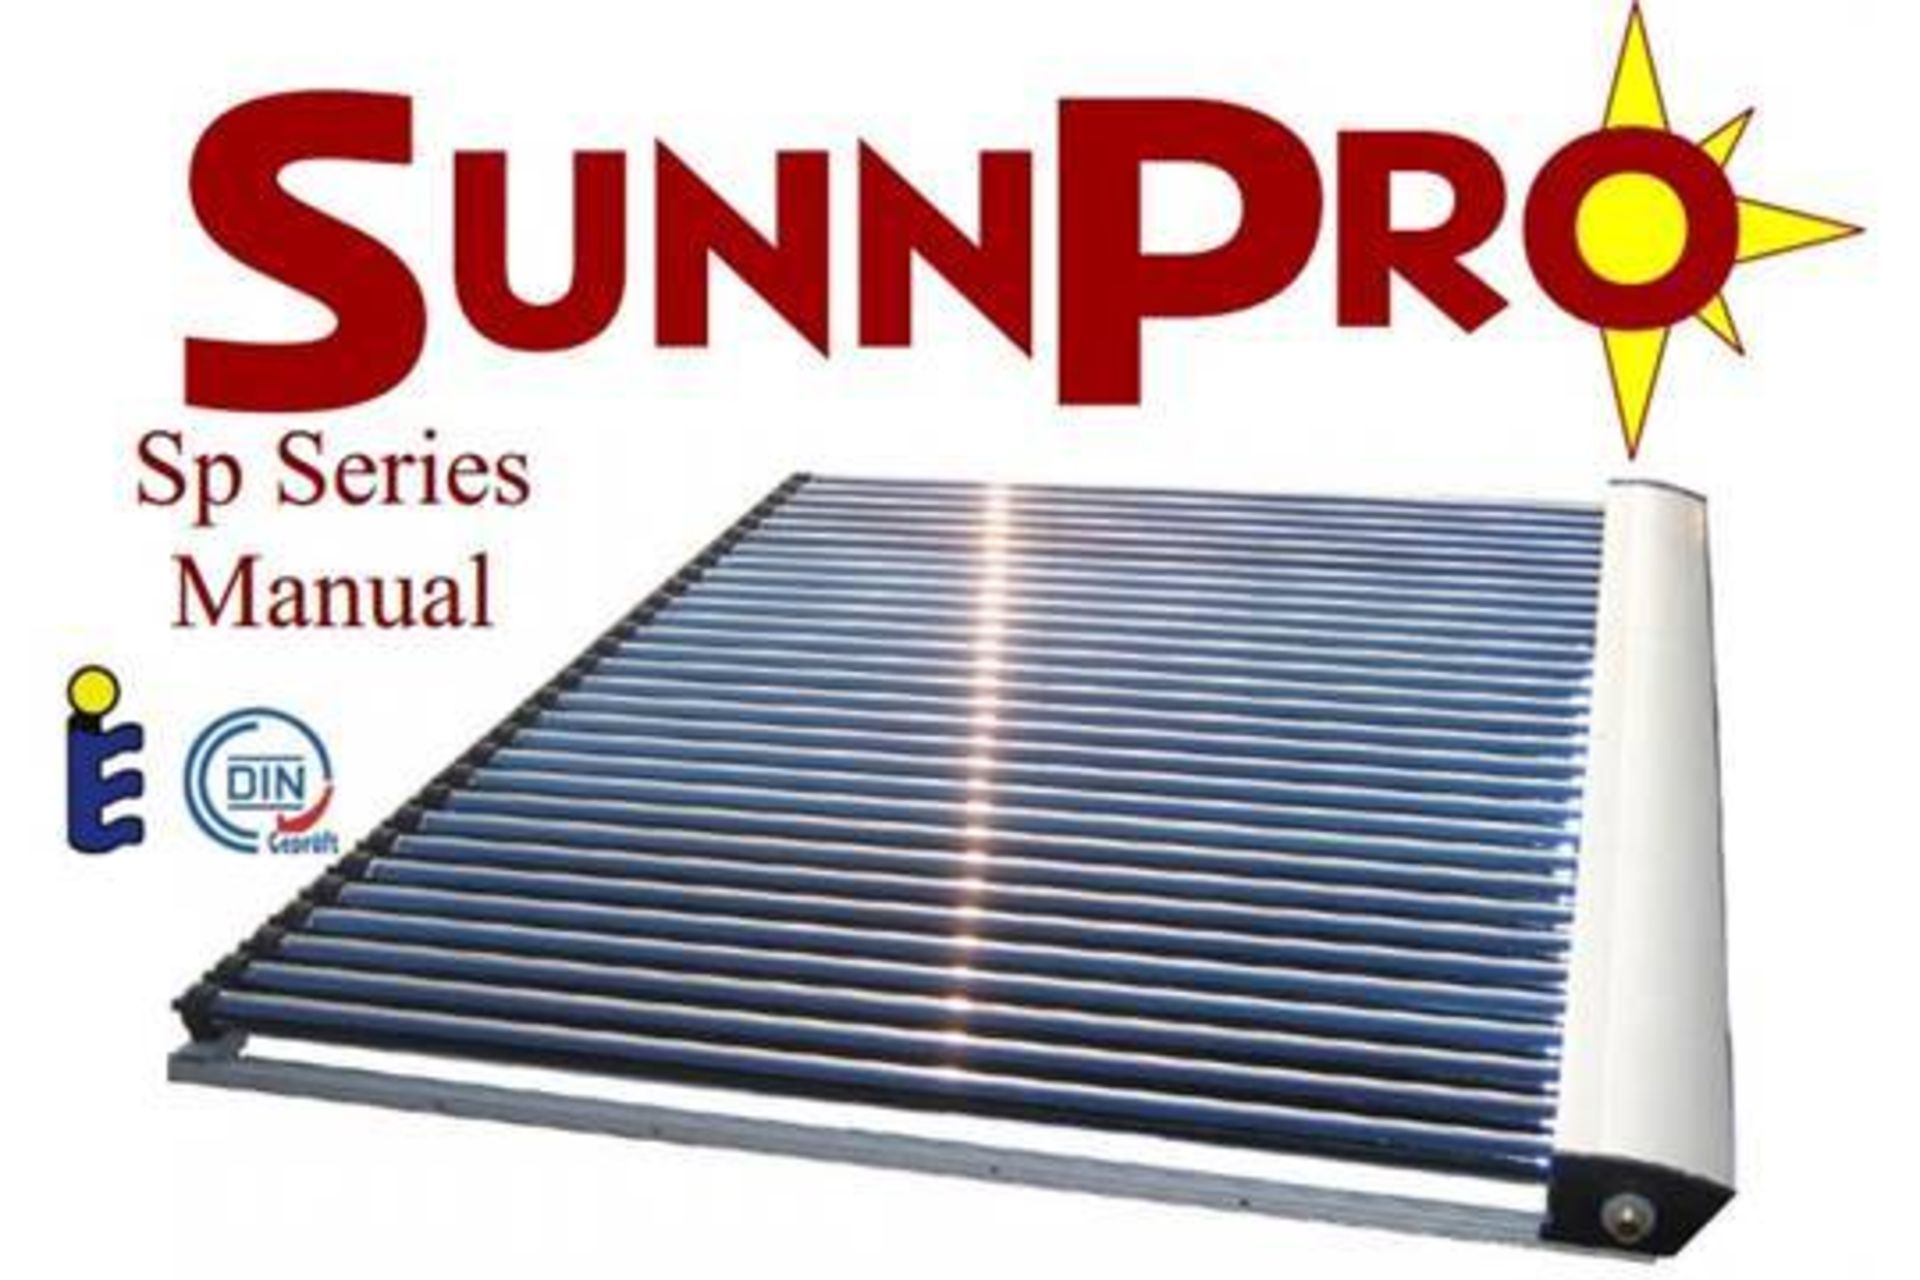 1 x Sunnpro SP30 Vacuum Tube Solar Panel - Size 2420 x 2010mm - Amongst The Most Efficient Solar - Image 10 of 17